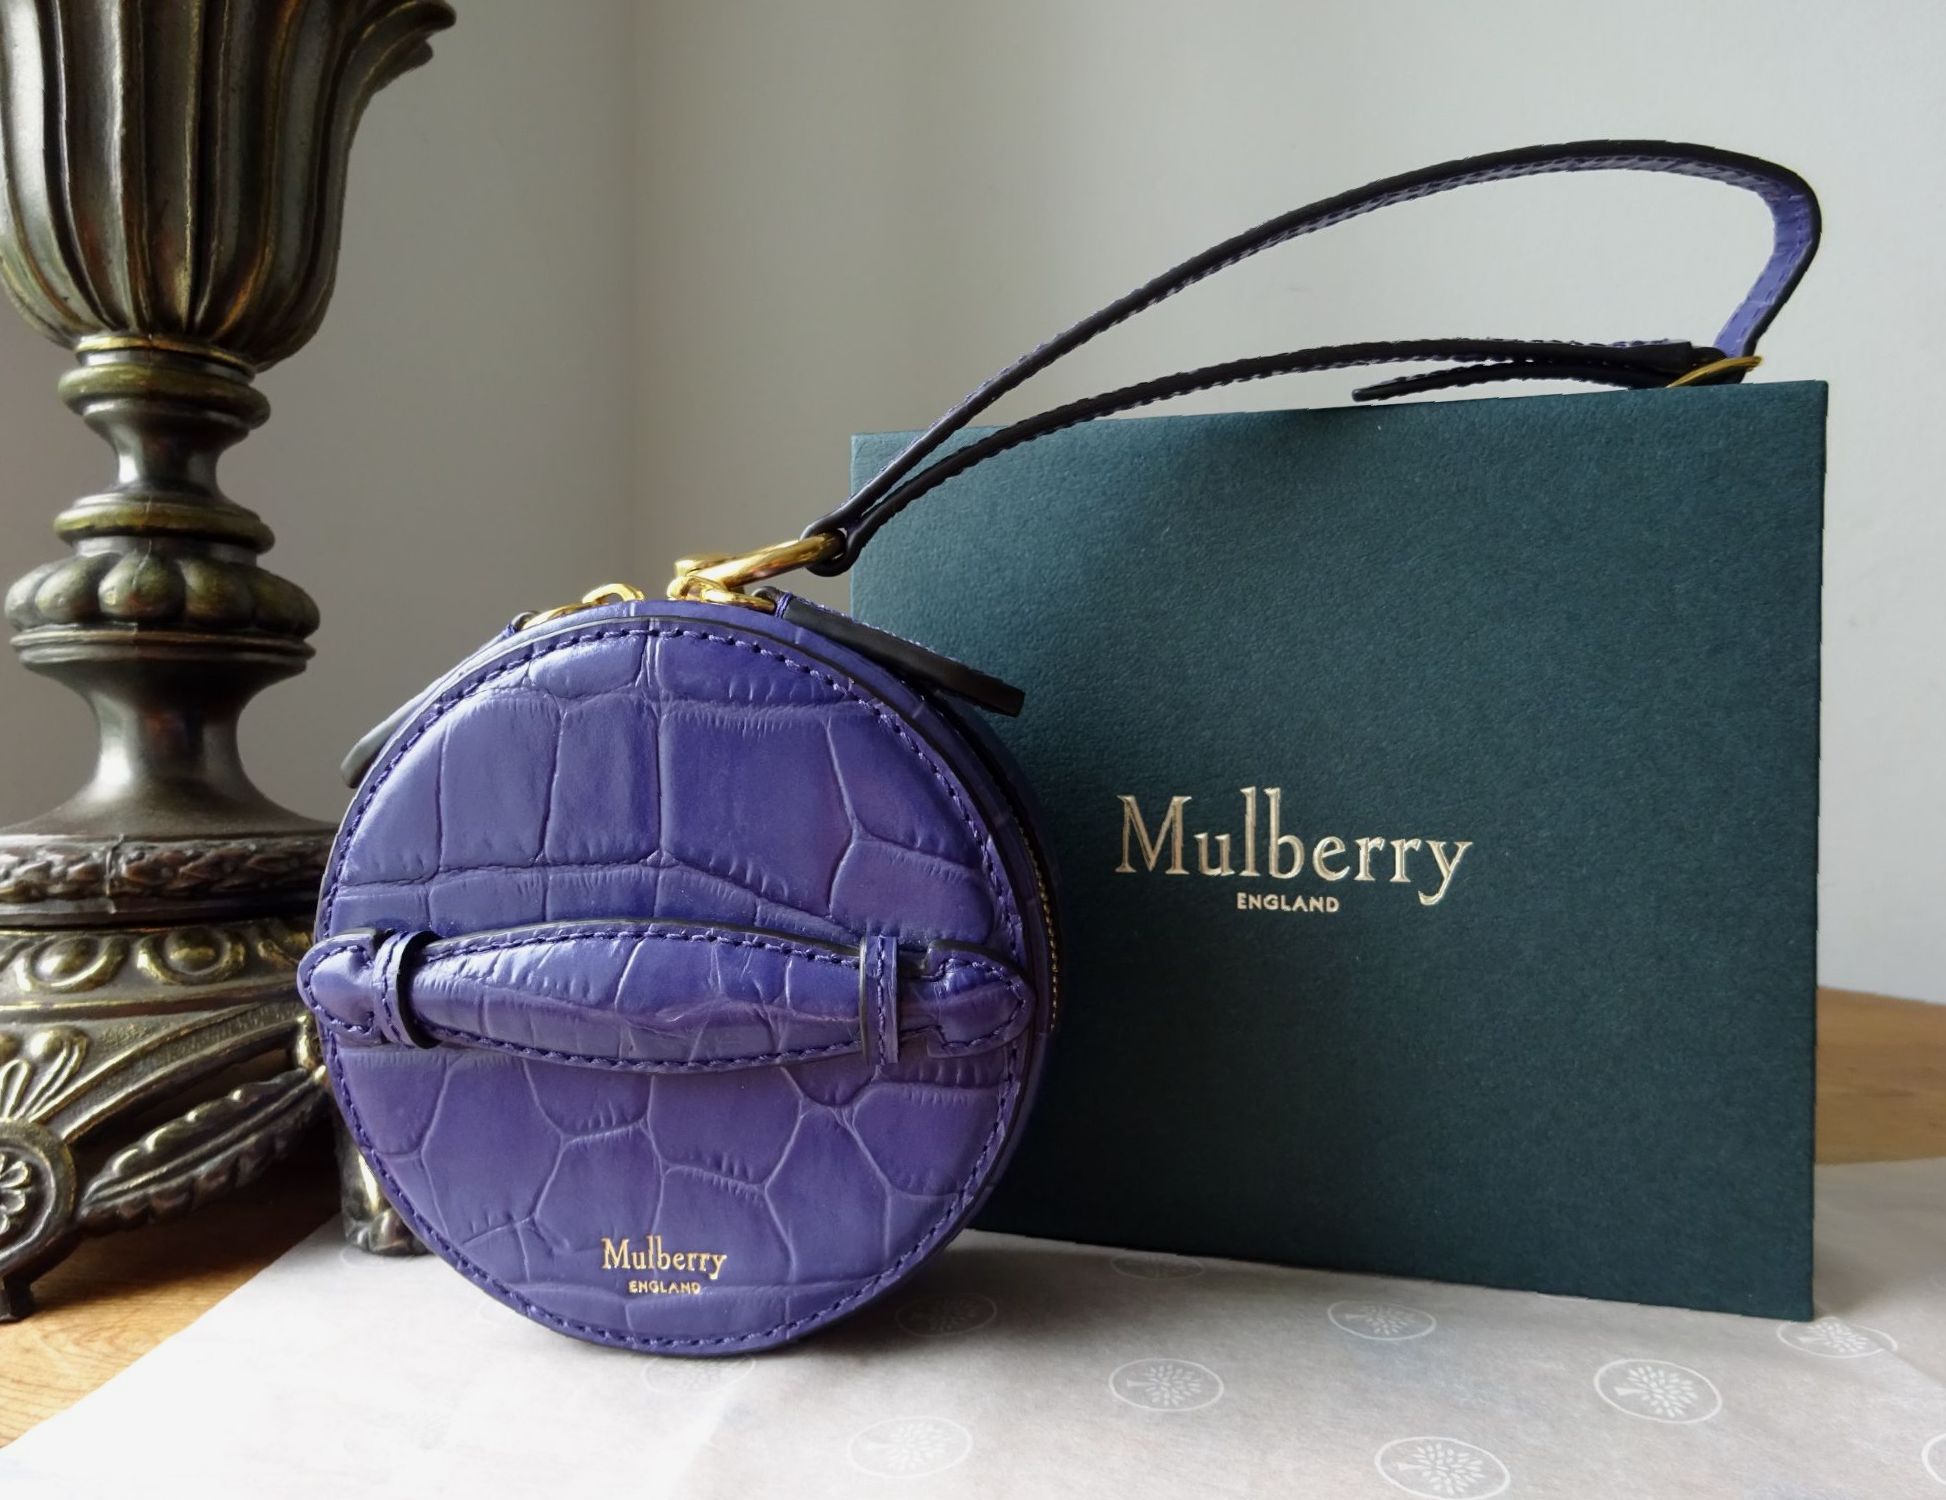 Mulberry Mini Trunk in Amethyst Croc Embossed Leather